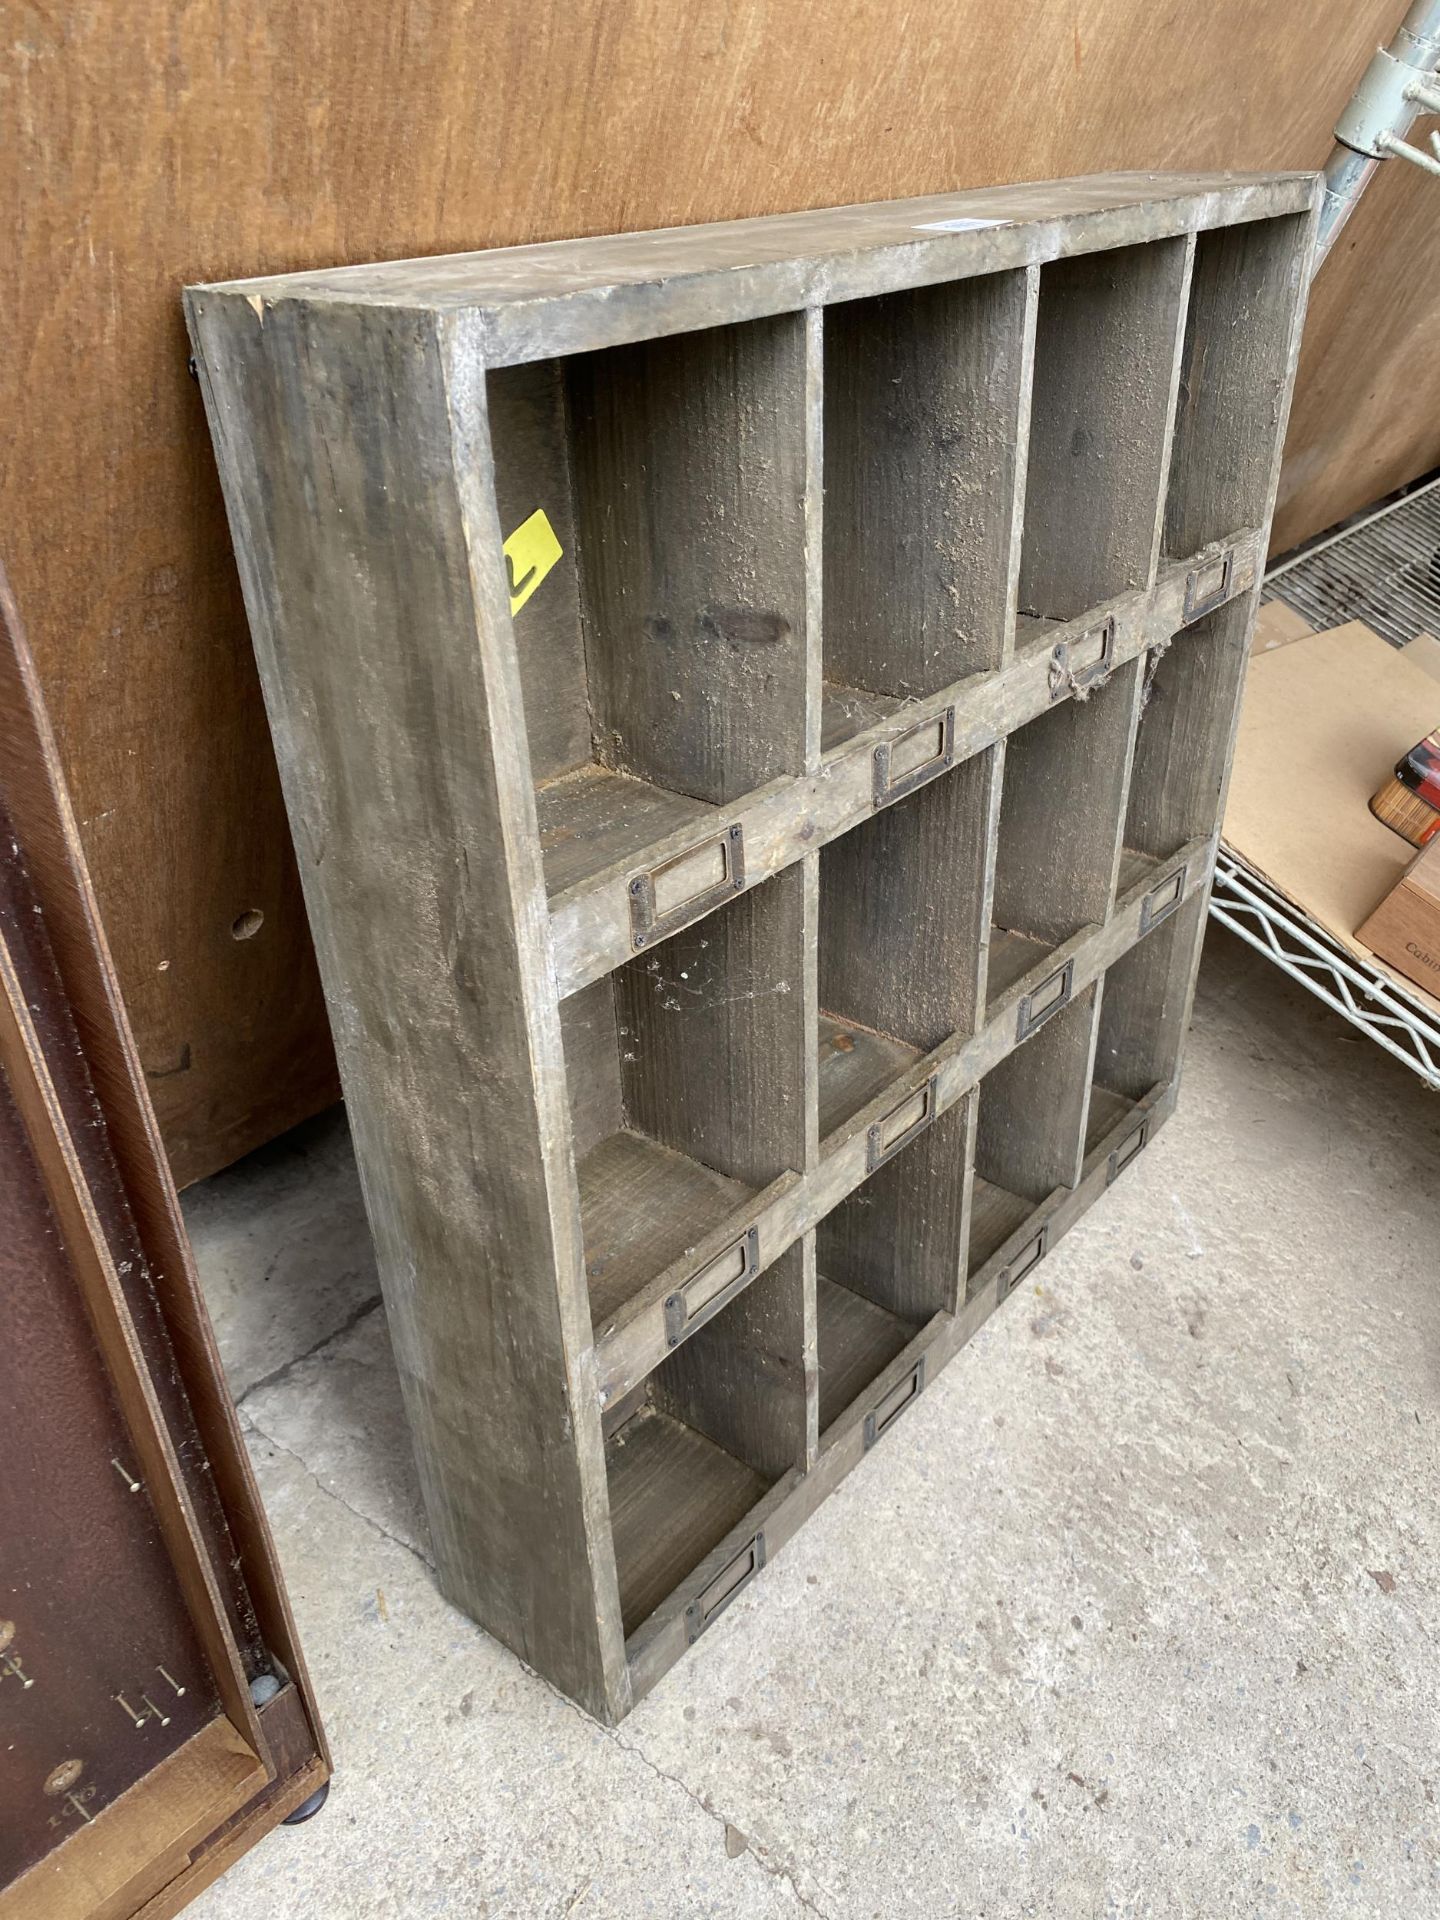 A VINTAGE 12 SECTION WOODEN PIGEON HOLE - Image 2 of 3